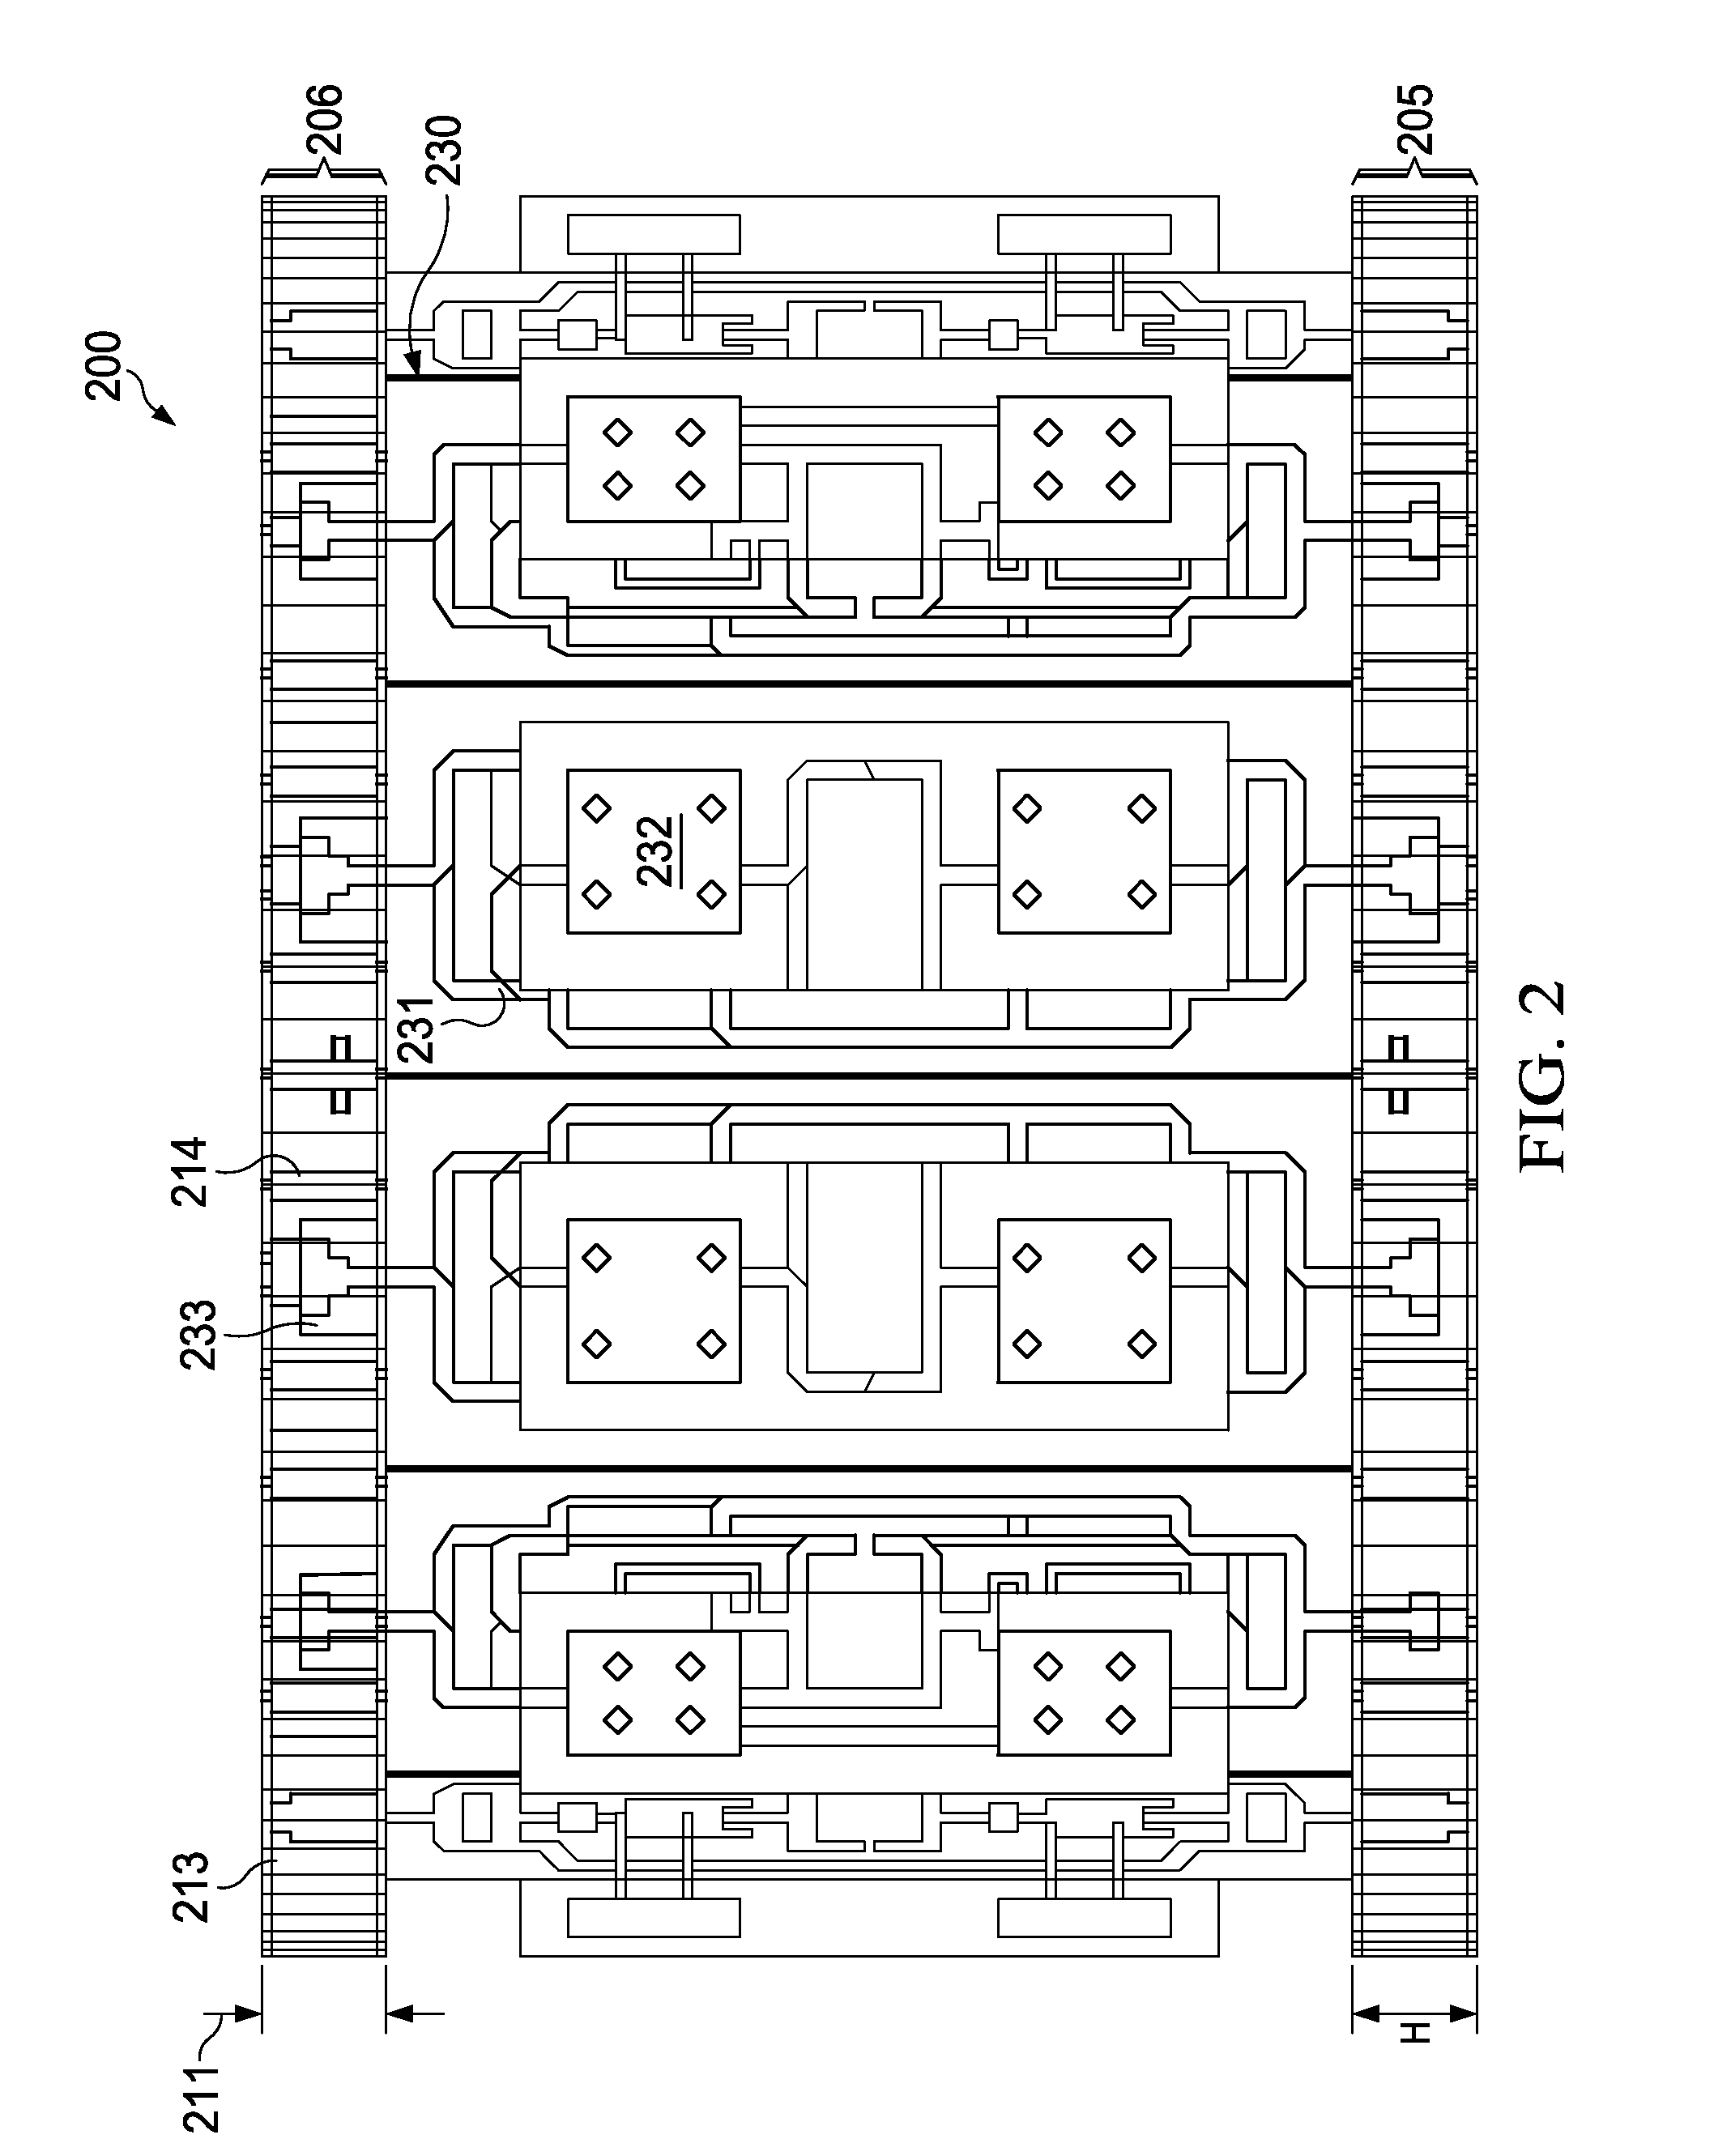 Apparatus and Assembling Method of a Dual Polarized Agile Cylindrical Antenna Array with Reconfigurable Radial Waveguides